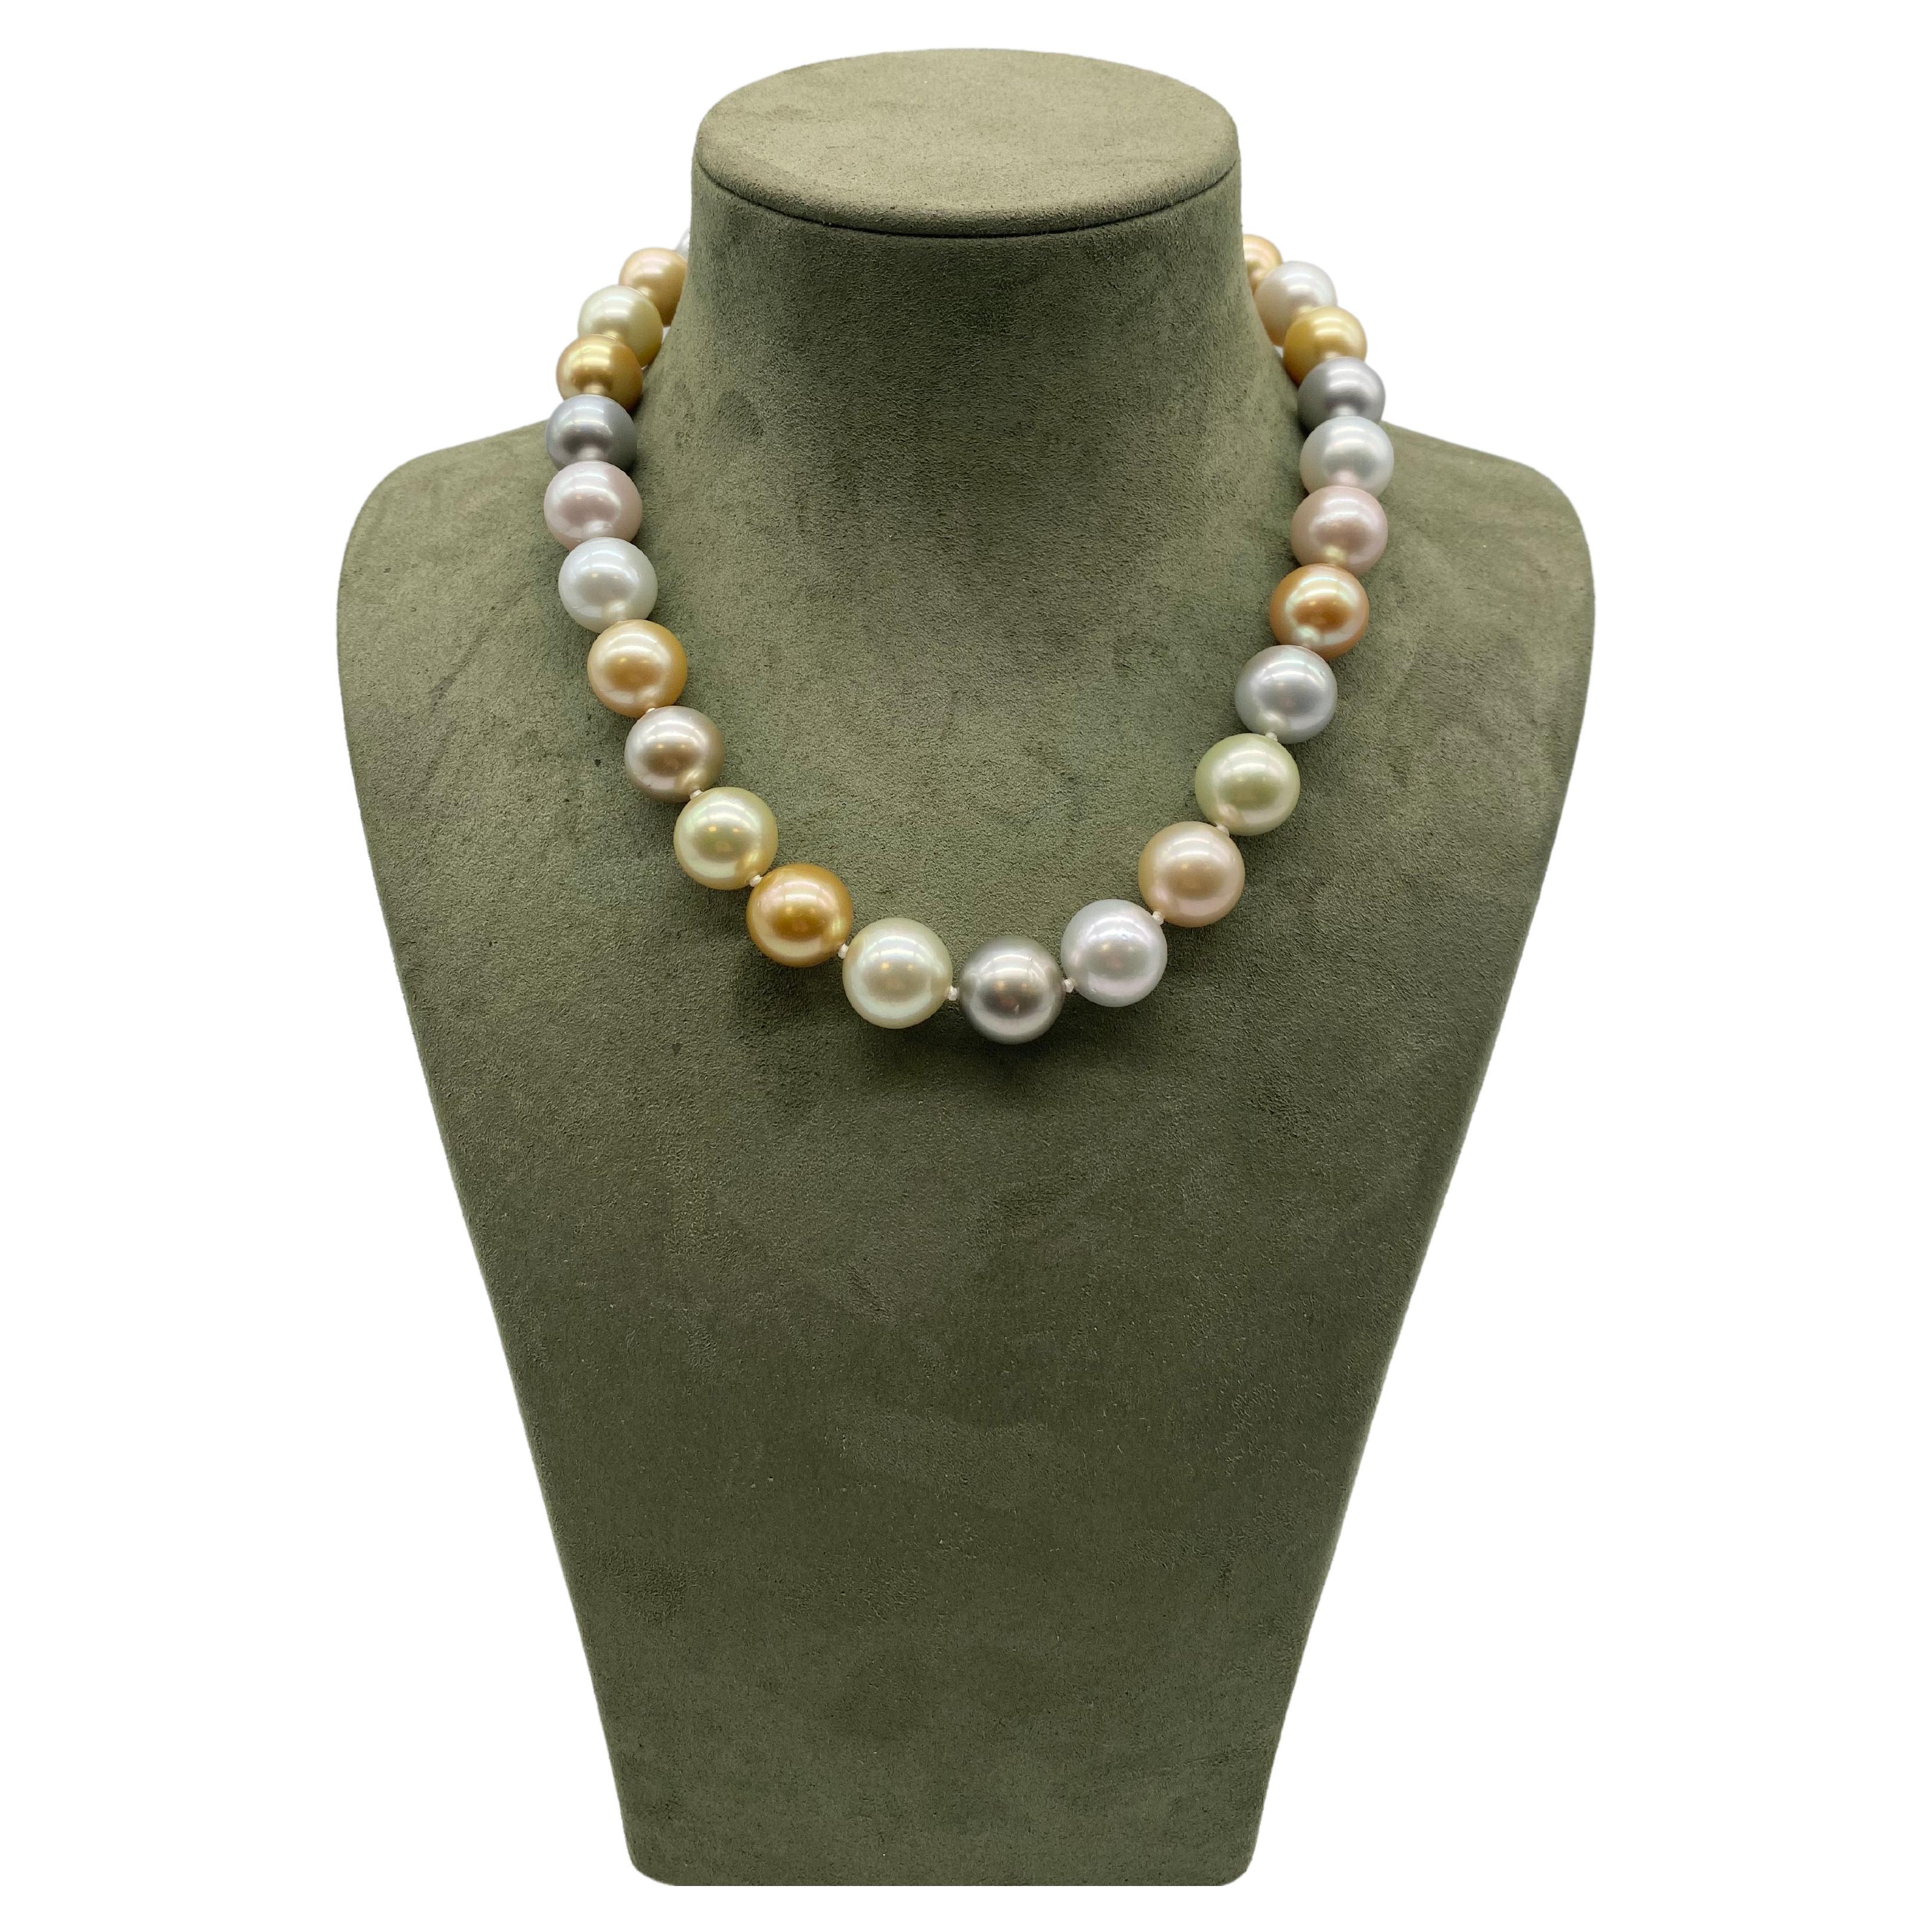 Discover this sumptuous Tahitian pearl necklace in 18-carat yellow gold, a piece of timeless elegance. Comprising 29 Tahitian pearls quality AAA, this necklace is a veritable treasure of the sea, captivating you with its natural beauty.

Measuring